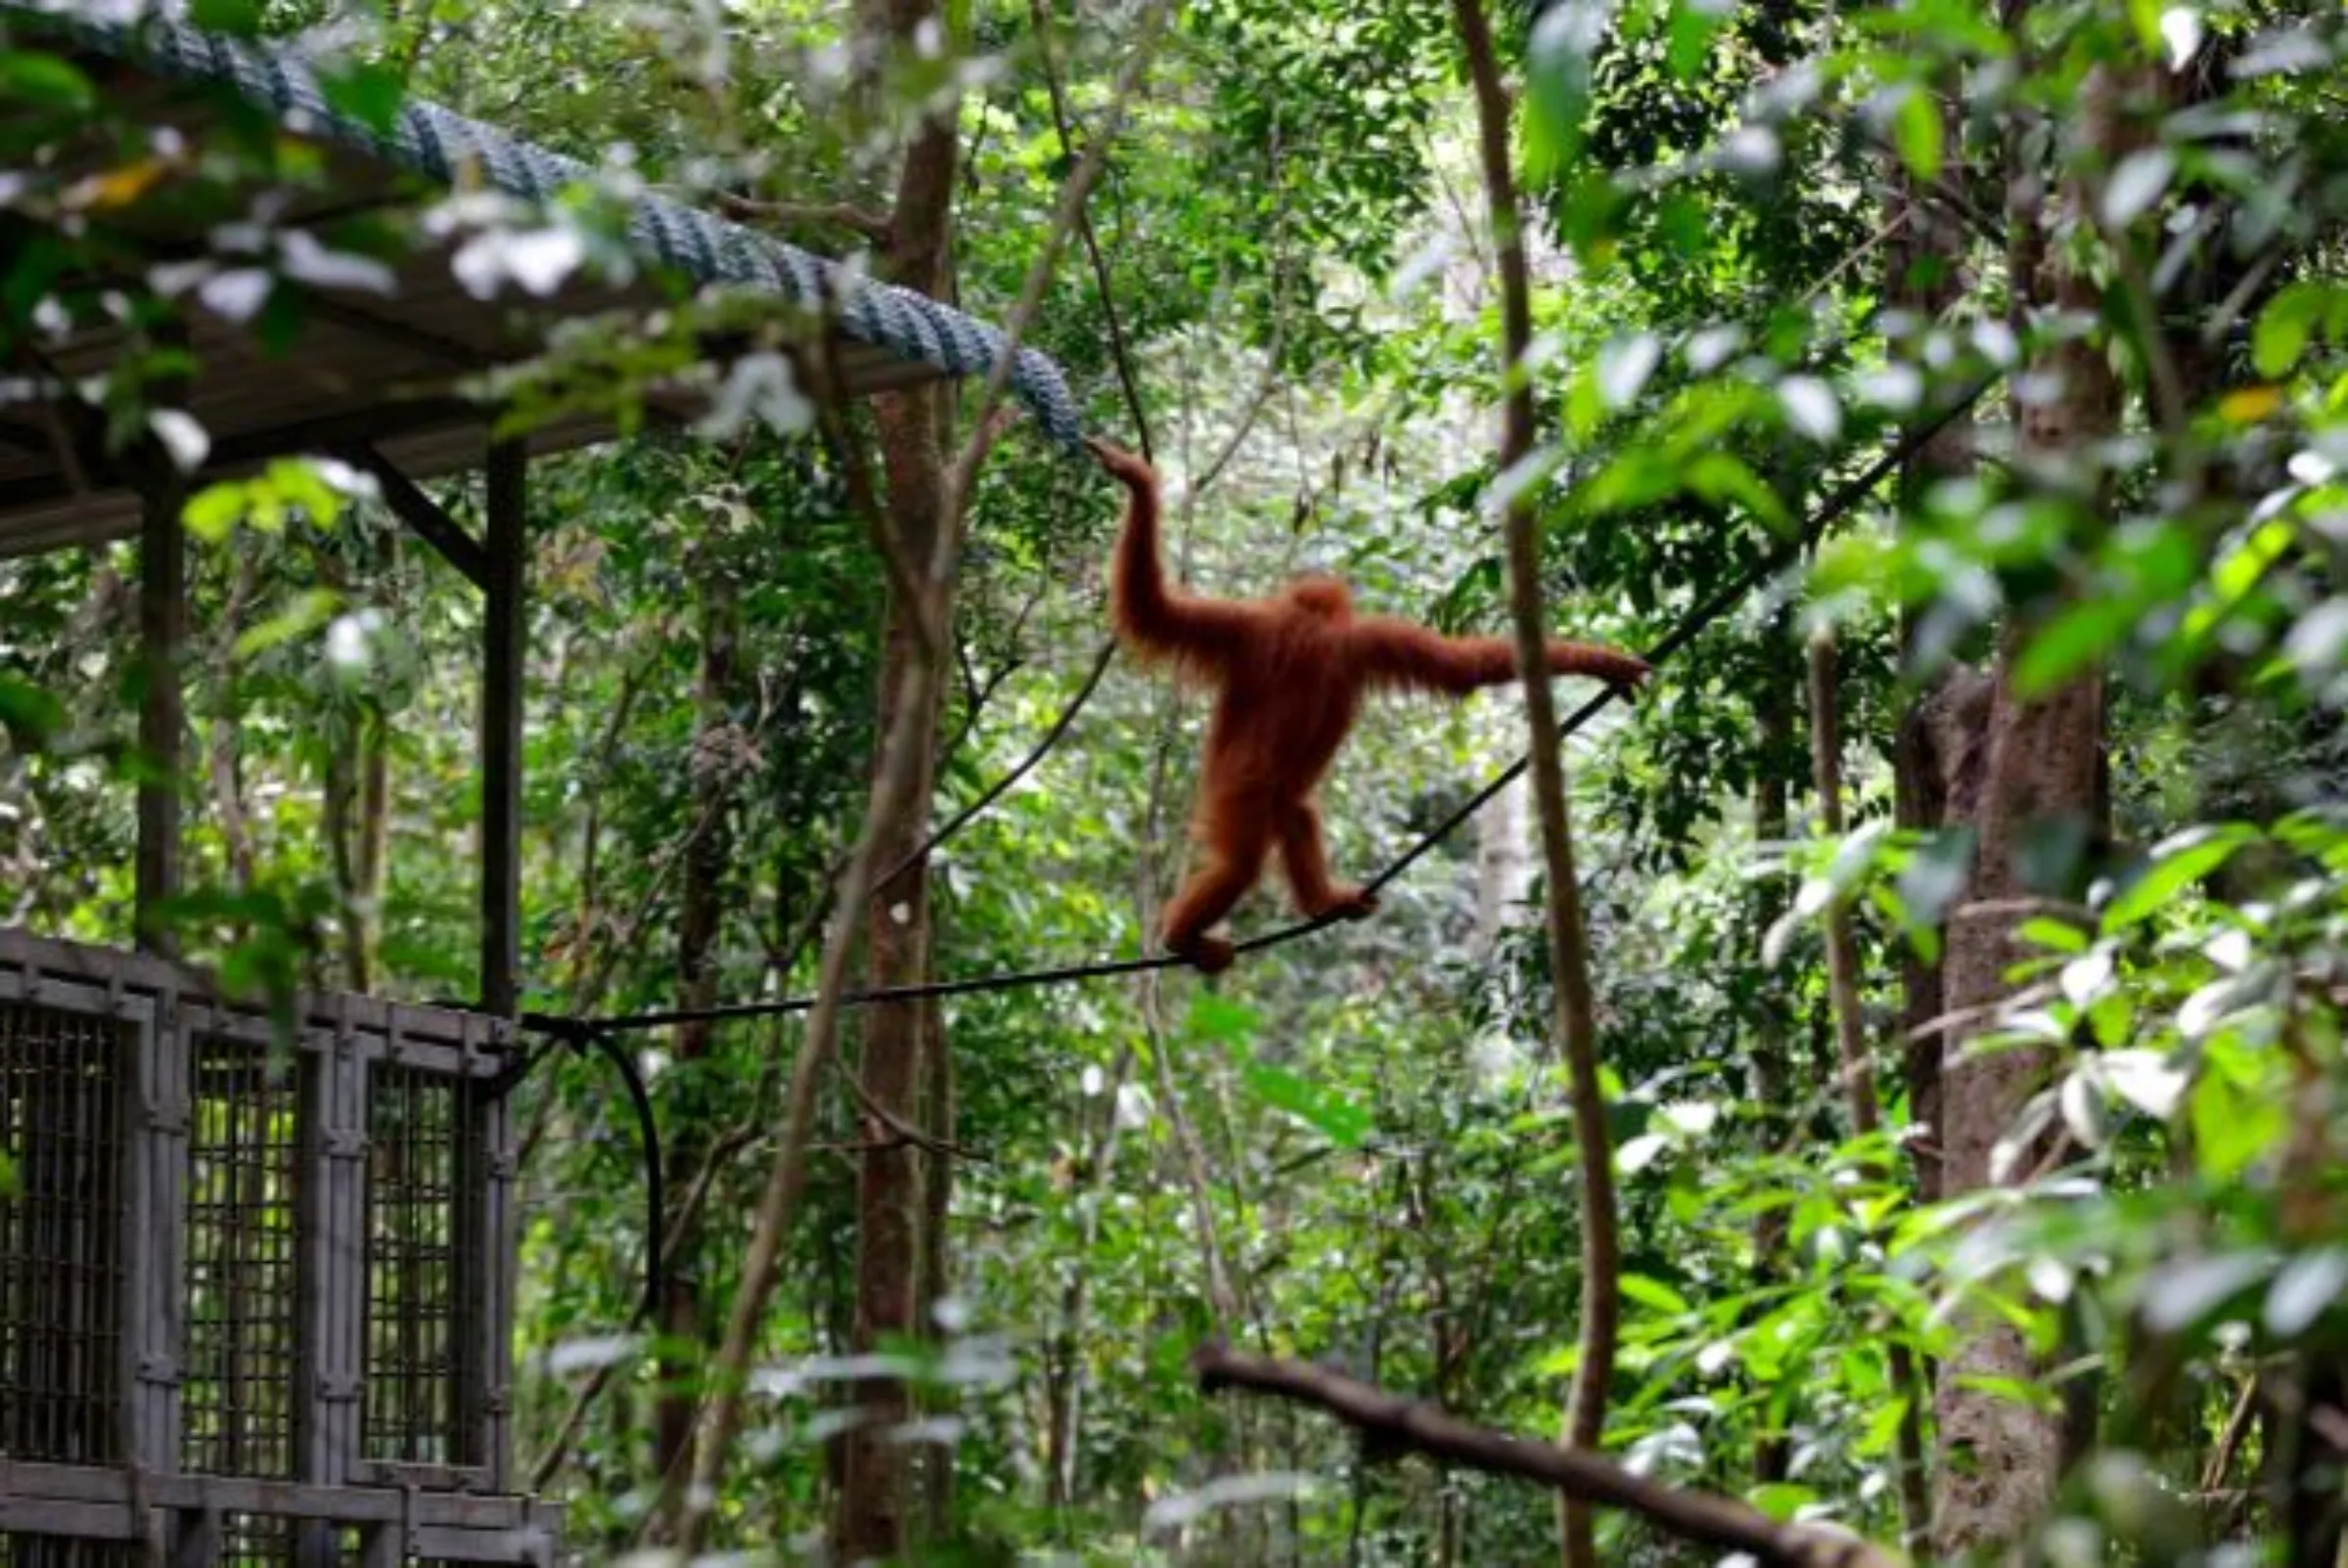 An orangutan of Sumatra hangs on a rope after it was released back into the wild by a Foundation for Sustainable Ecosystem and Nature Conservation Agency Aceh at the Jantho Nature Reserve reintroduction, in Aceh, Indonesia, February 13, 2020. Antara Foto/Irwansyah Putra/via REUTERS